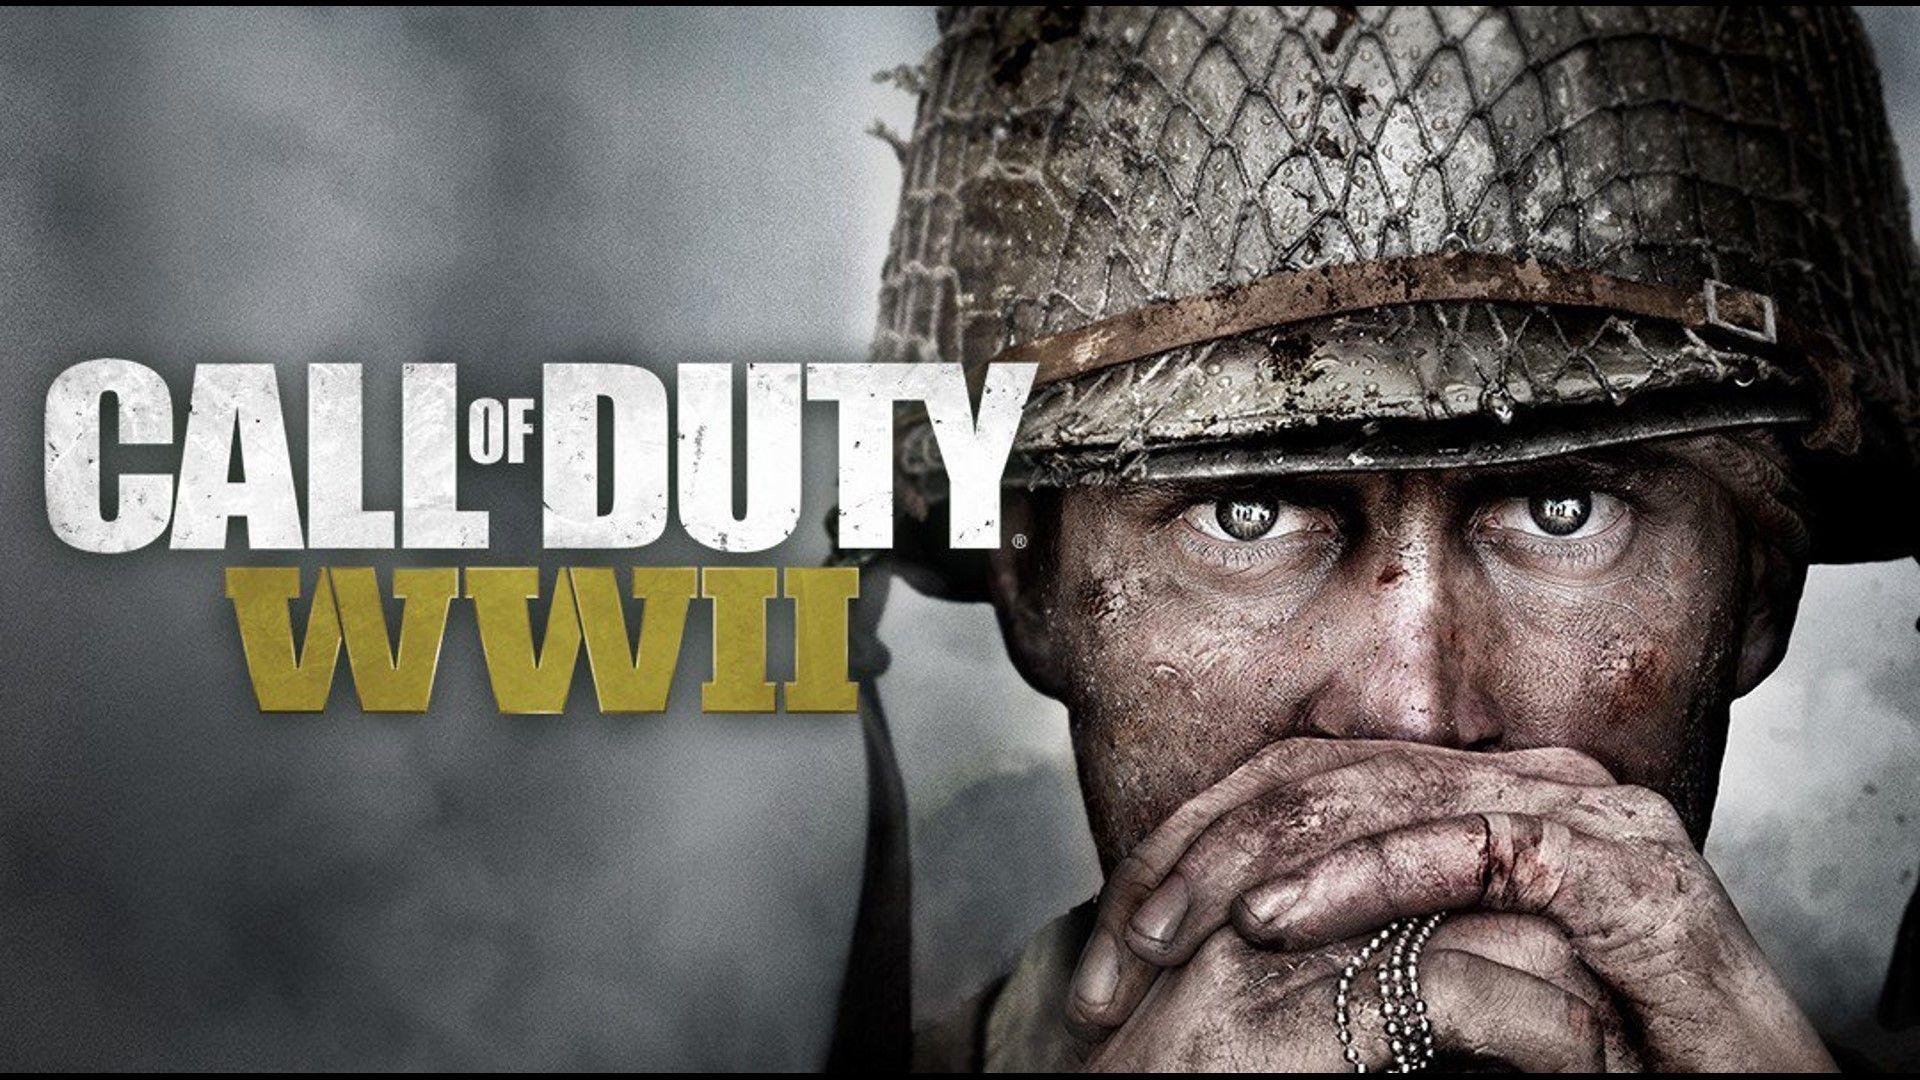 Call of Duty: WWII Multiplayer Beta is going live next week